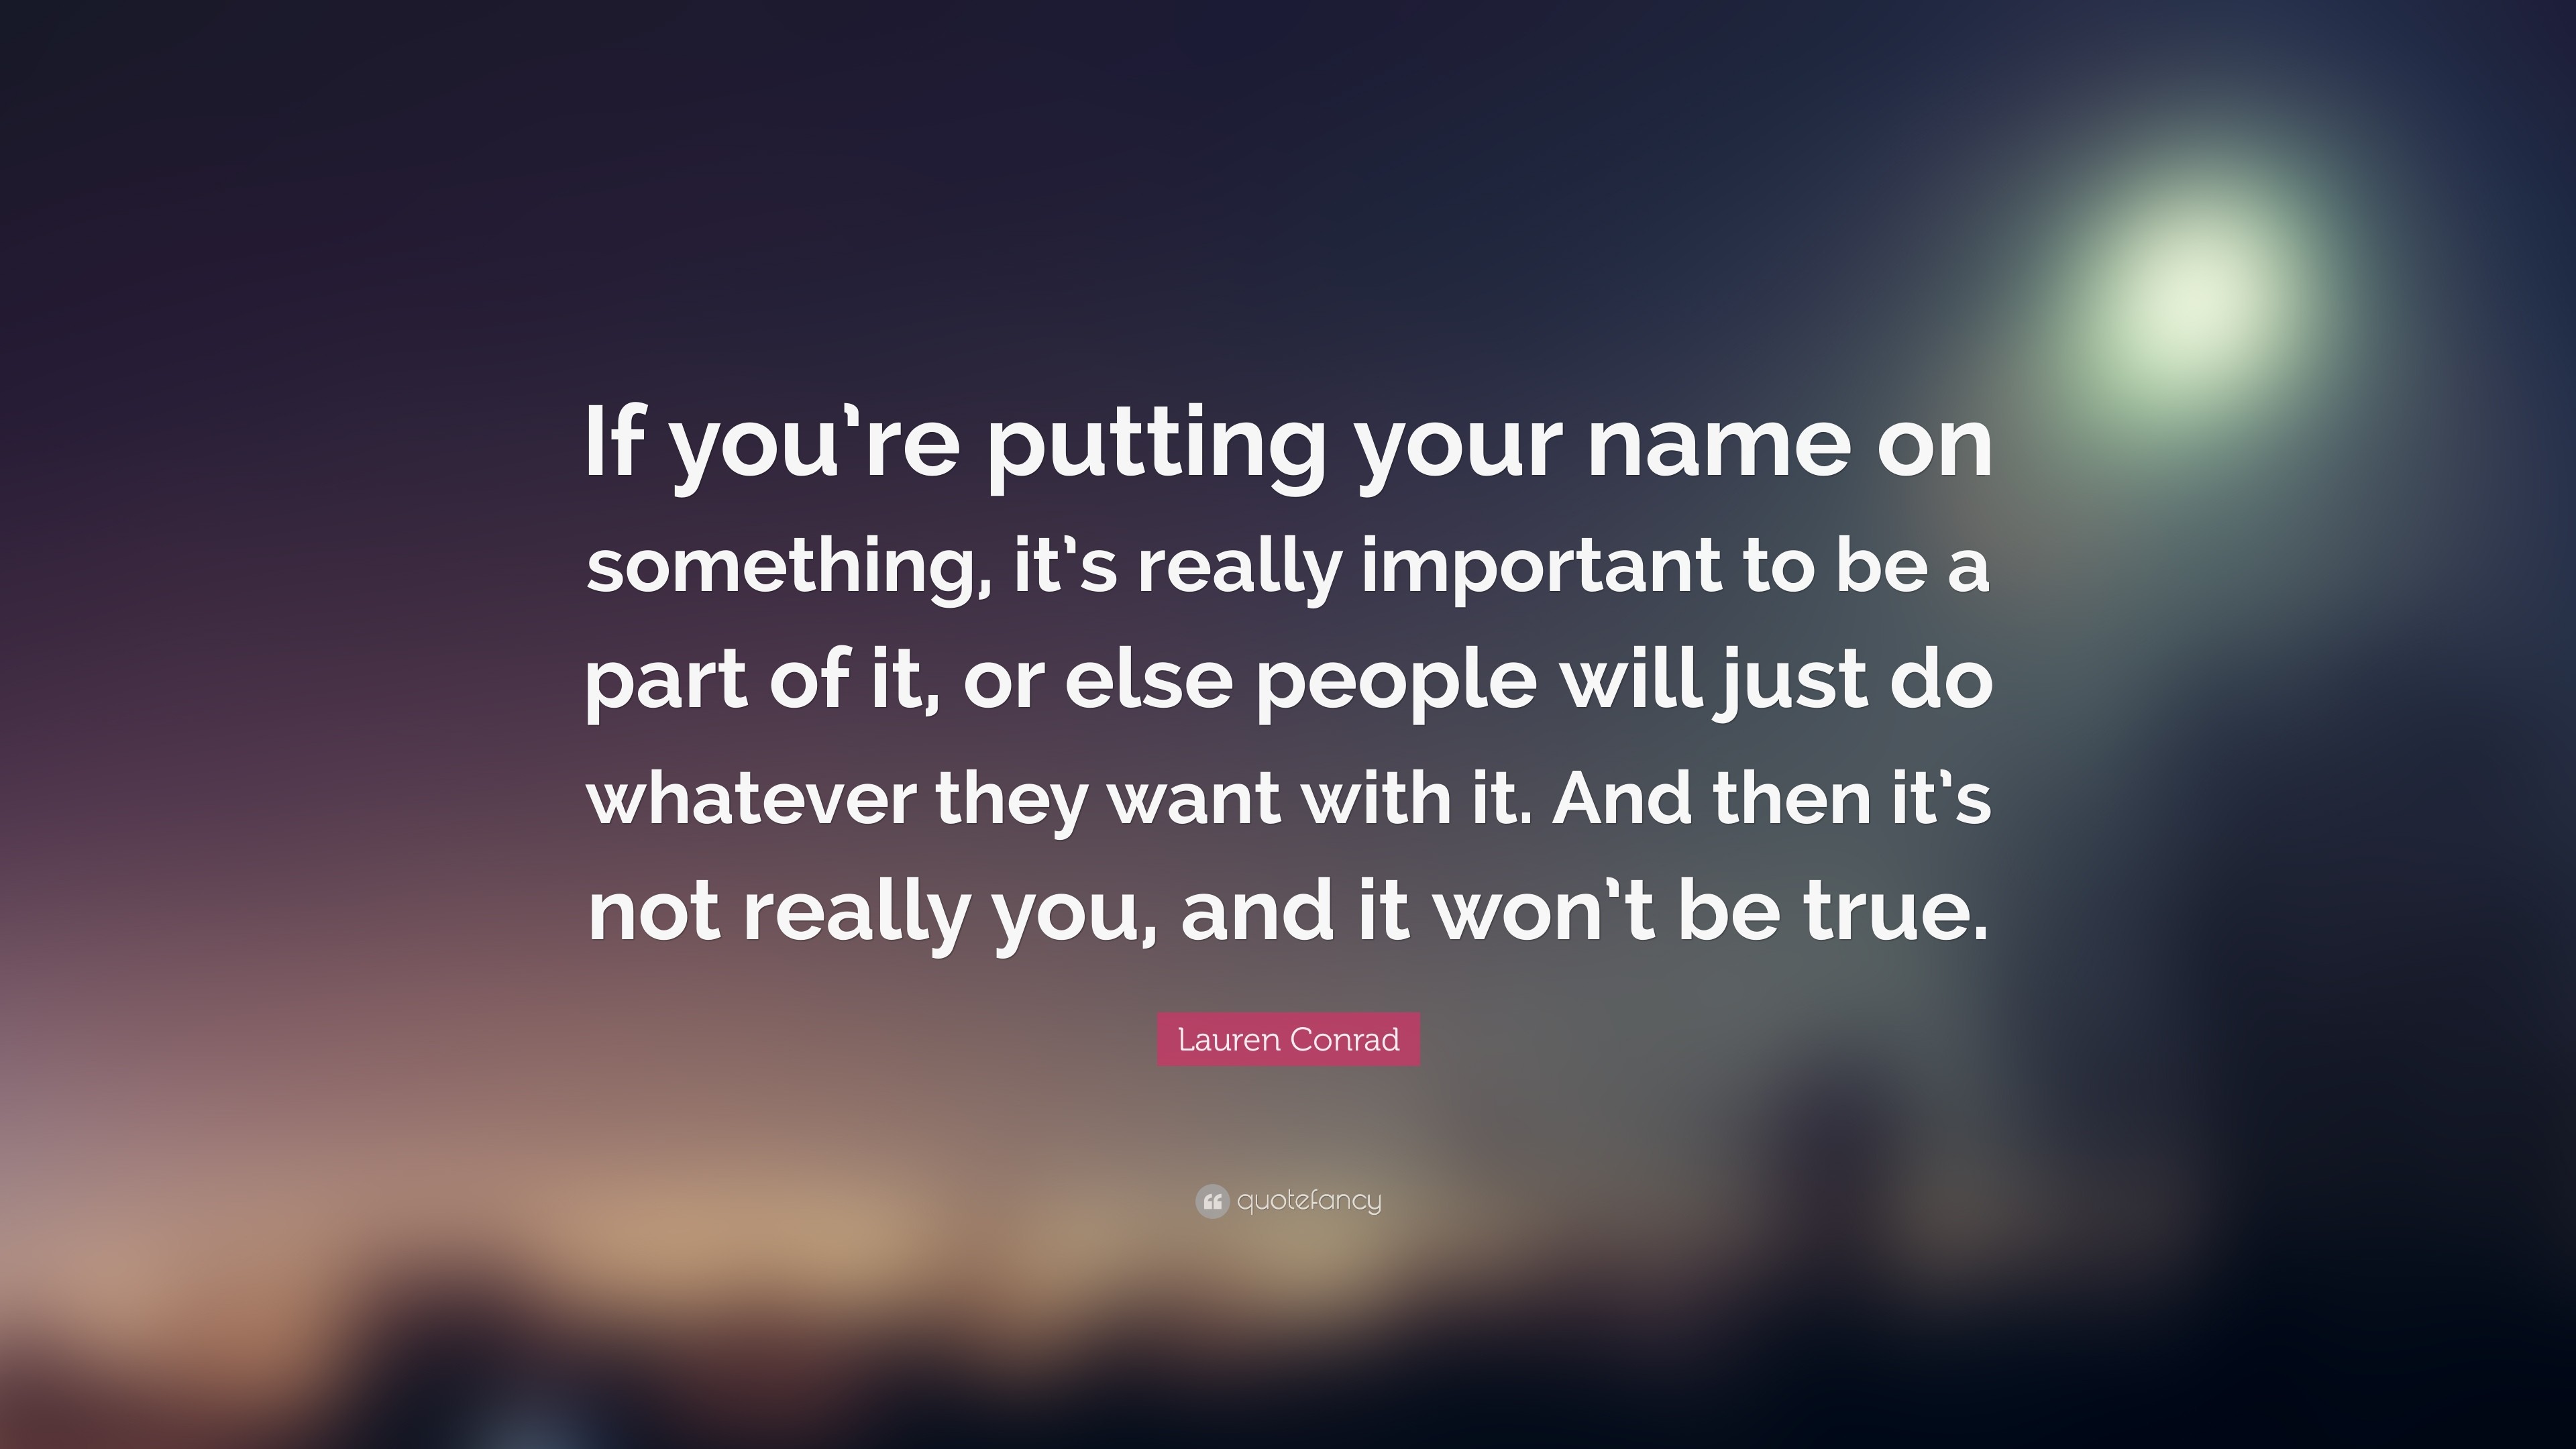 3840x2160 Lauren Conrad Quote: “If you're putting your name on something, it's